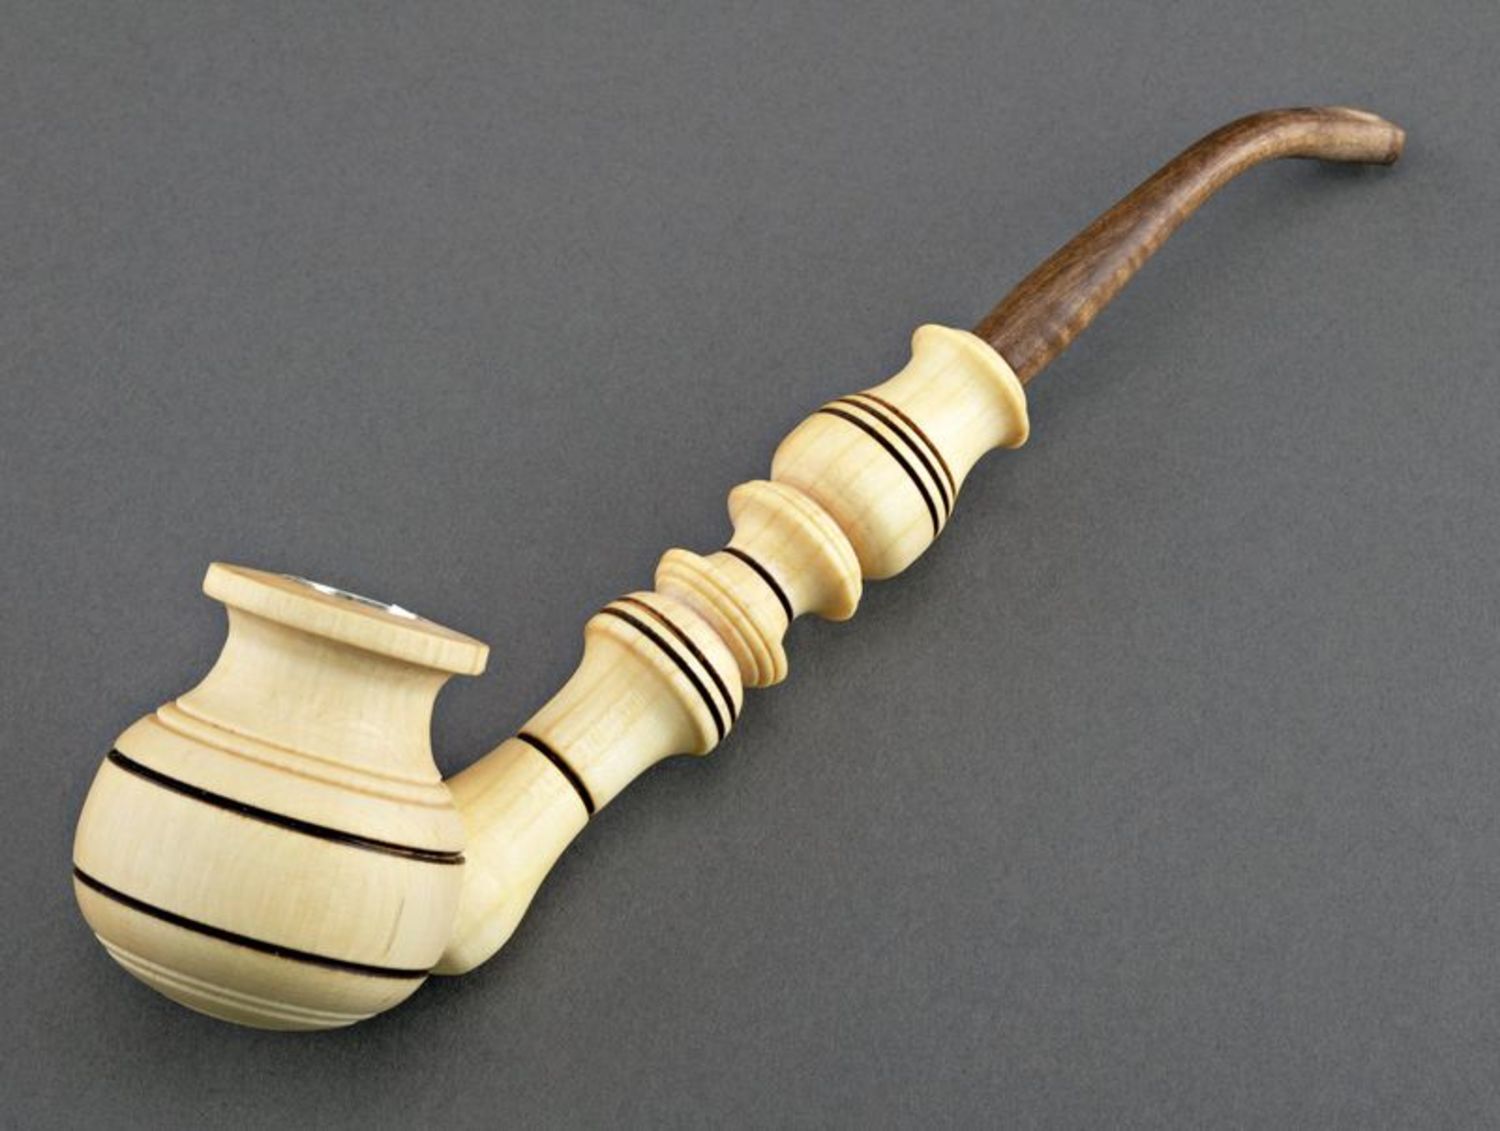 Wooden smoking pipe decorative use only photo 3